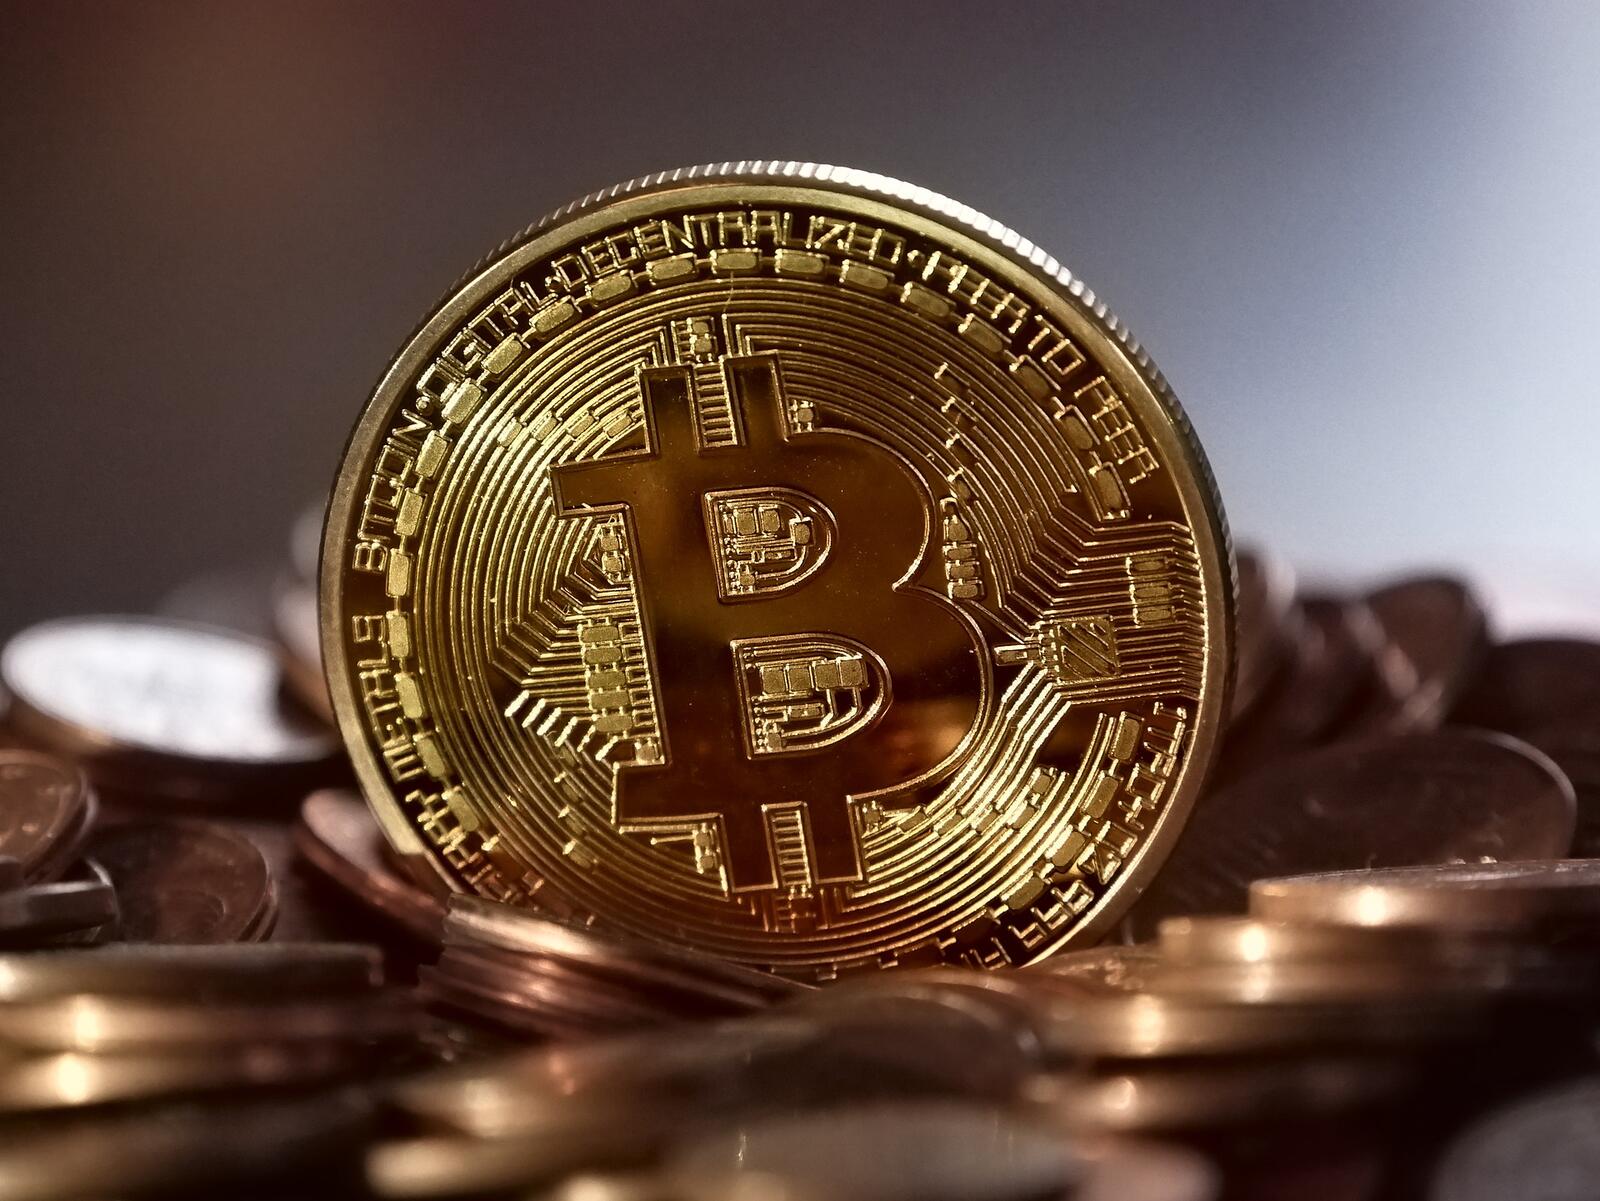 Wallpapers Bitcoin coin digital currency on the desktop